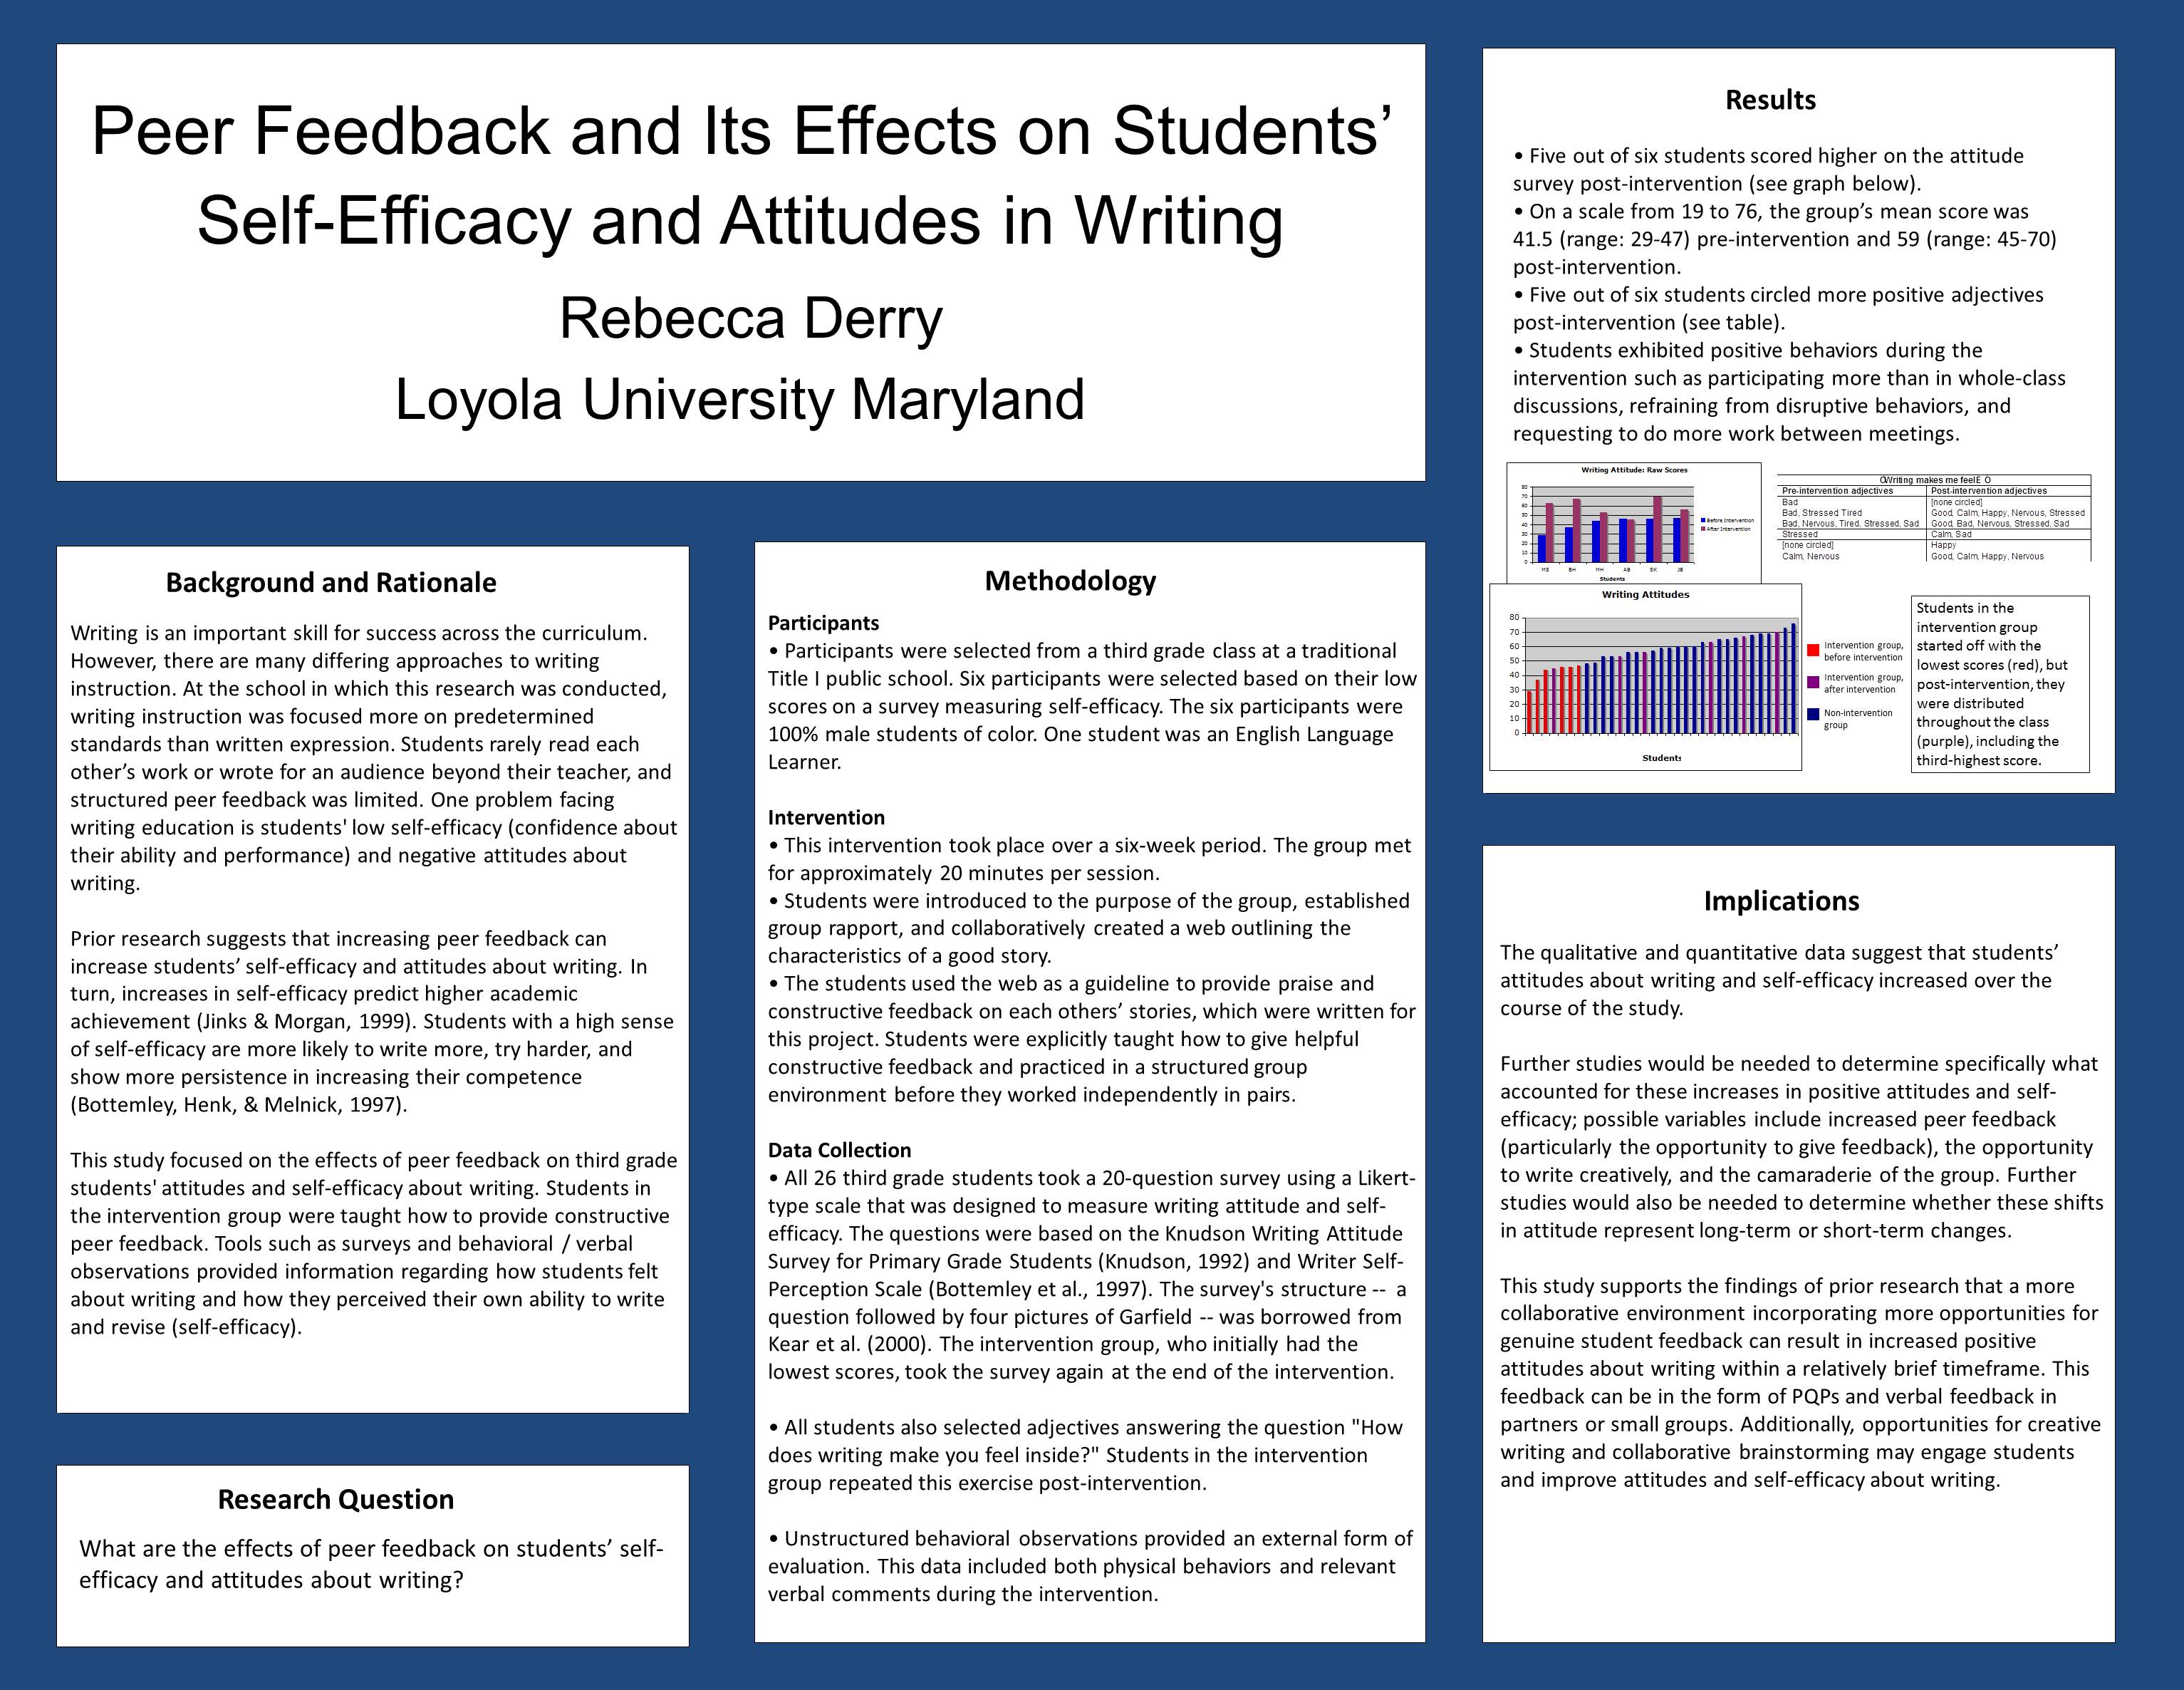 poster image: 'Peer Feedback and Its Effects on Students' Self-Efficacy and Attitudes in Writing'